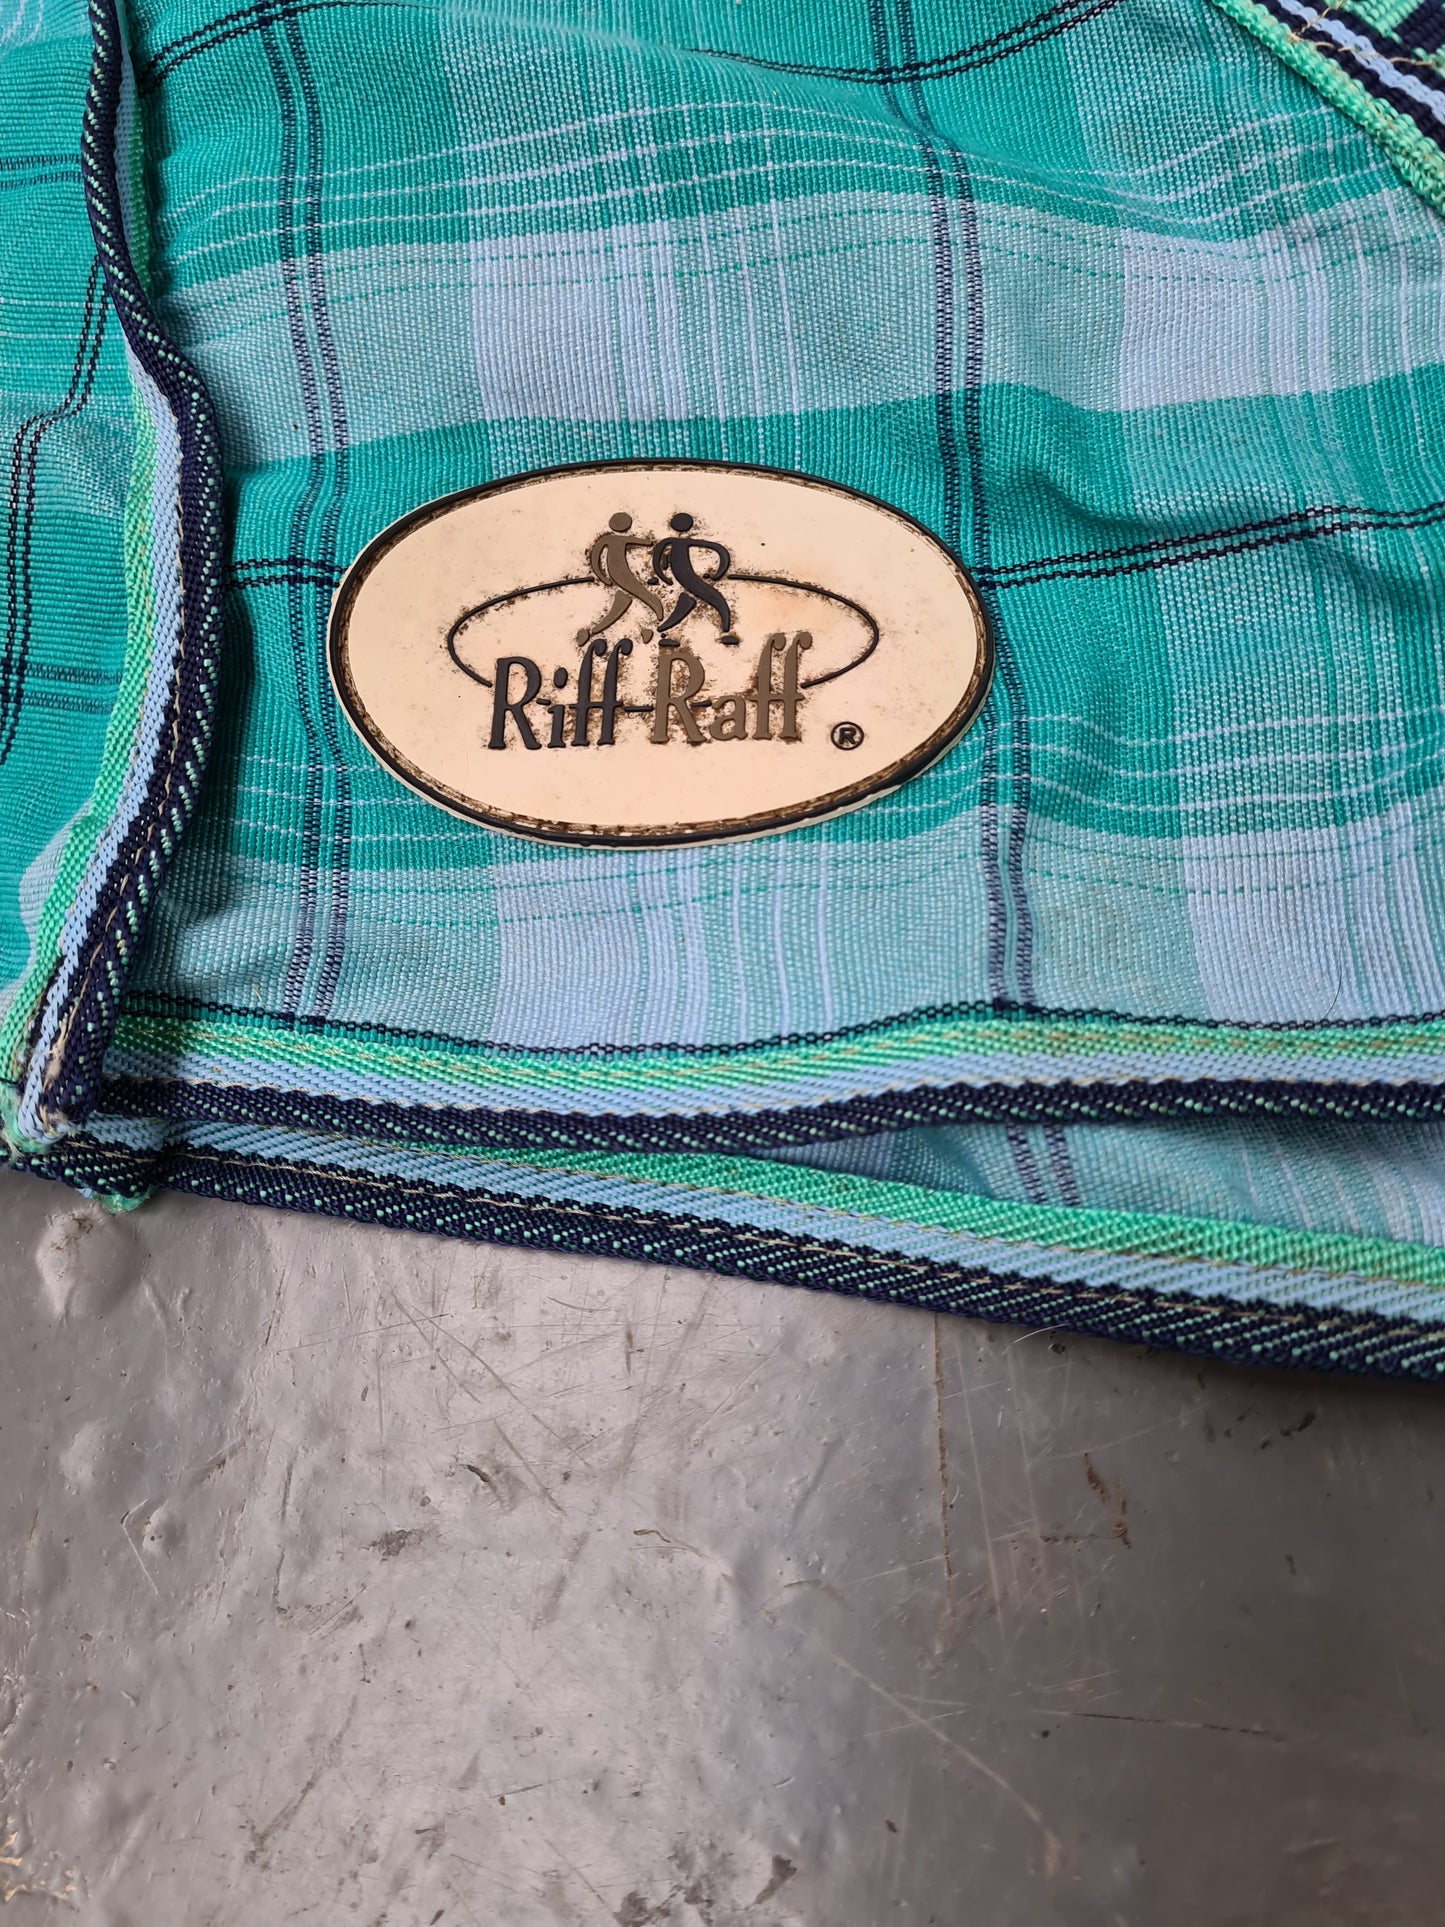 Used 4'0" blue check Riff-Raff stable sheet FREE POSTAGE☆